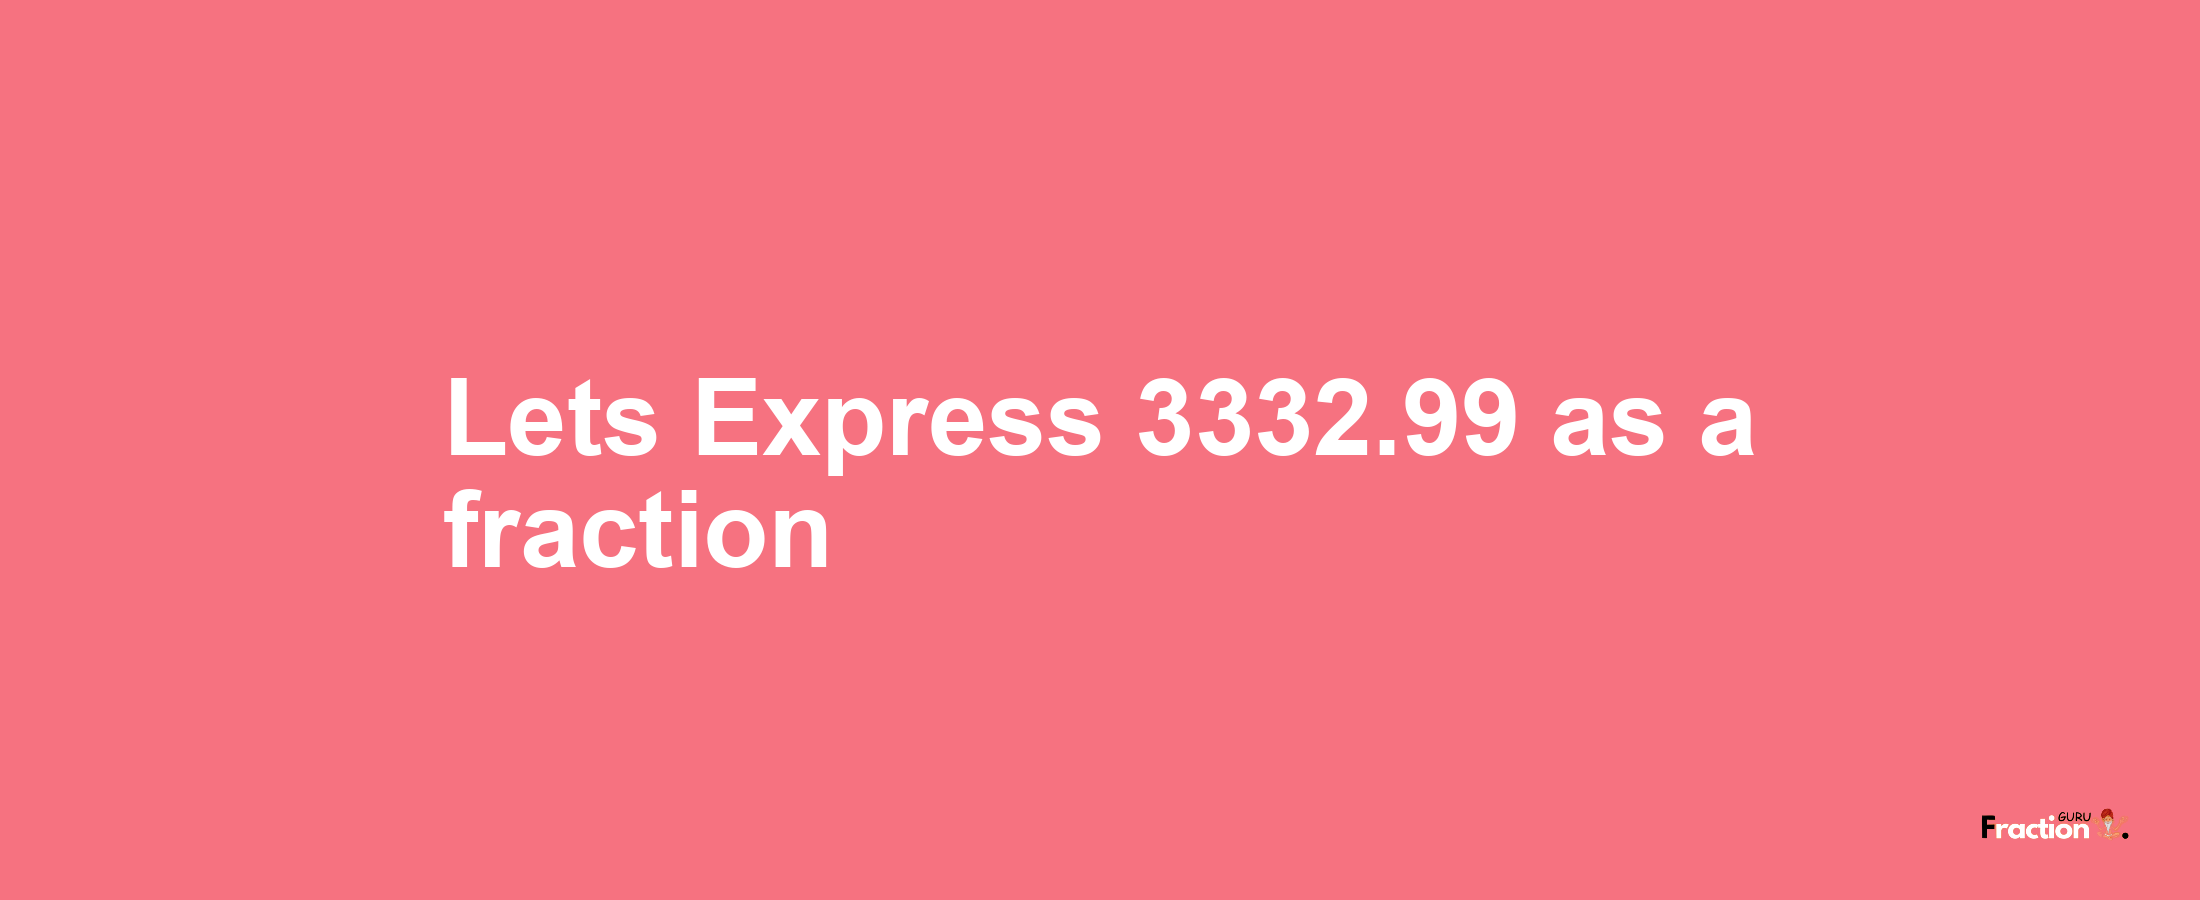 Lets Express 3332.99 as afraction